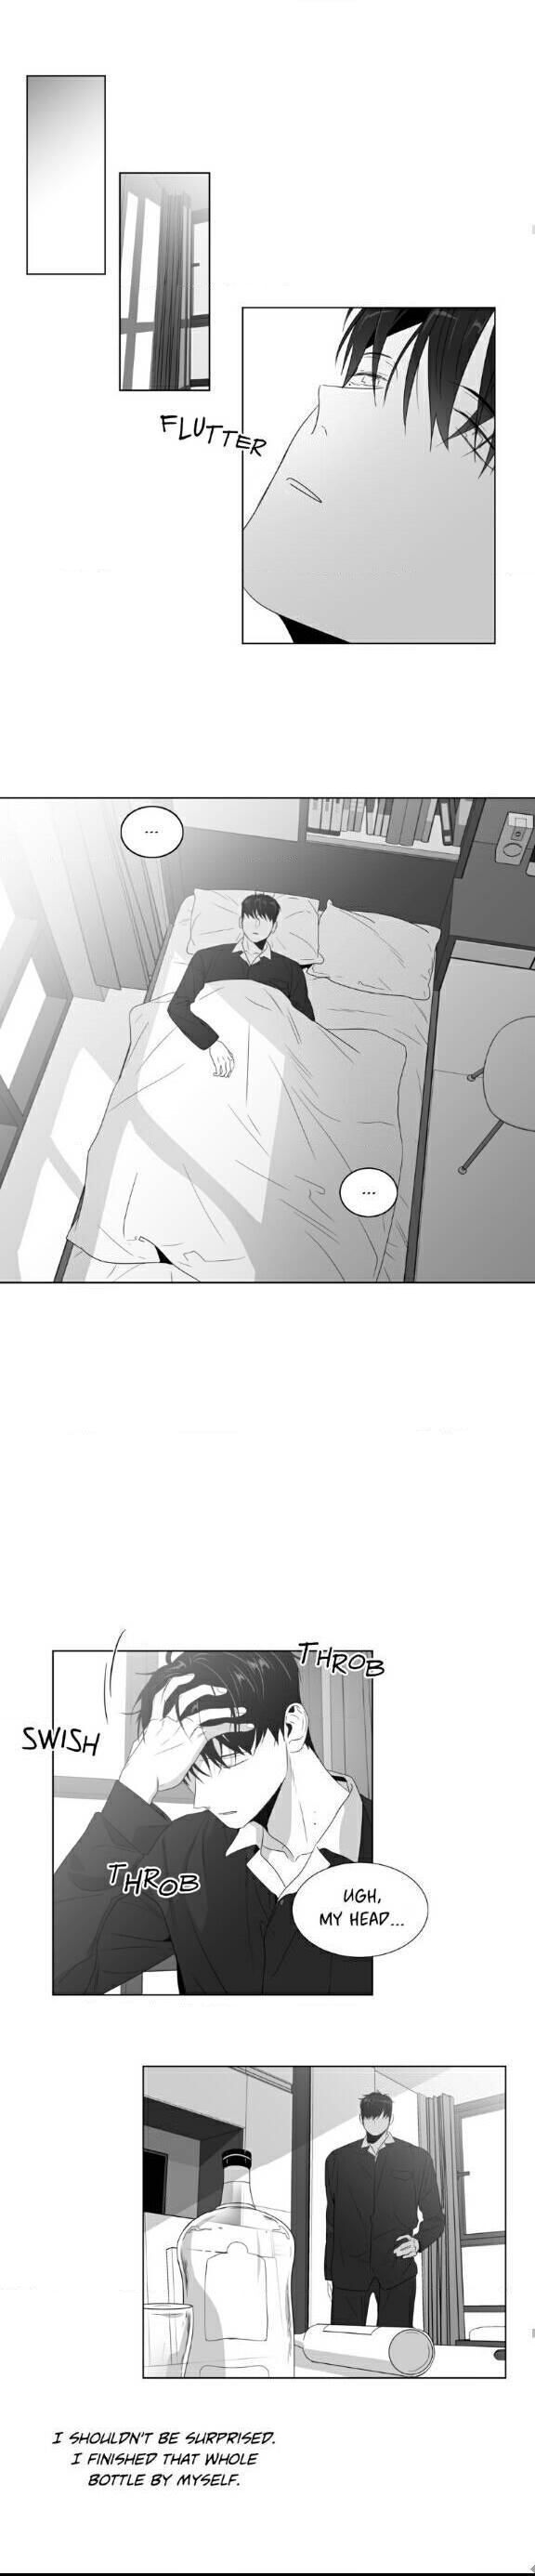 Lover Boy (Lezhin) Chapter 059 page 9